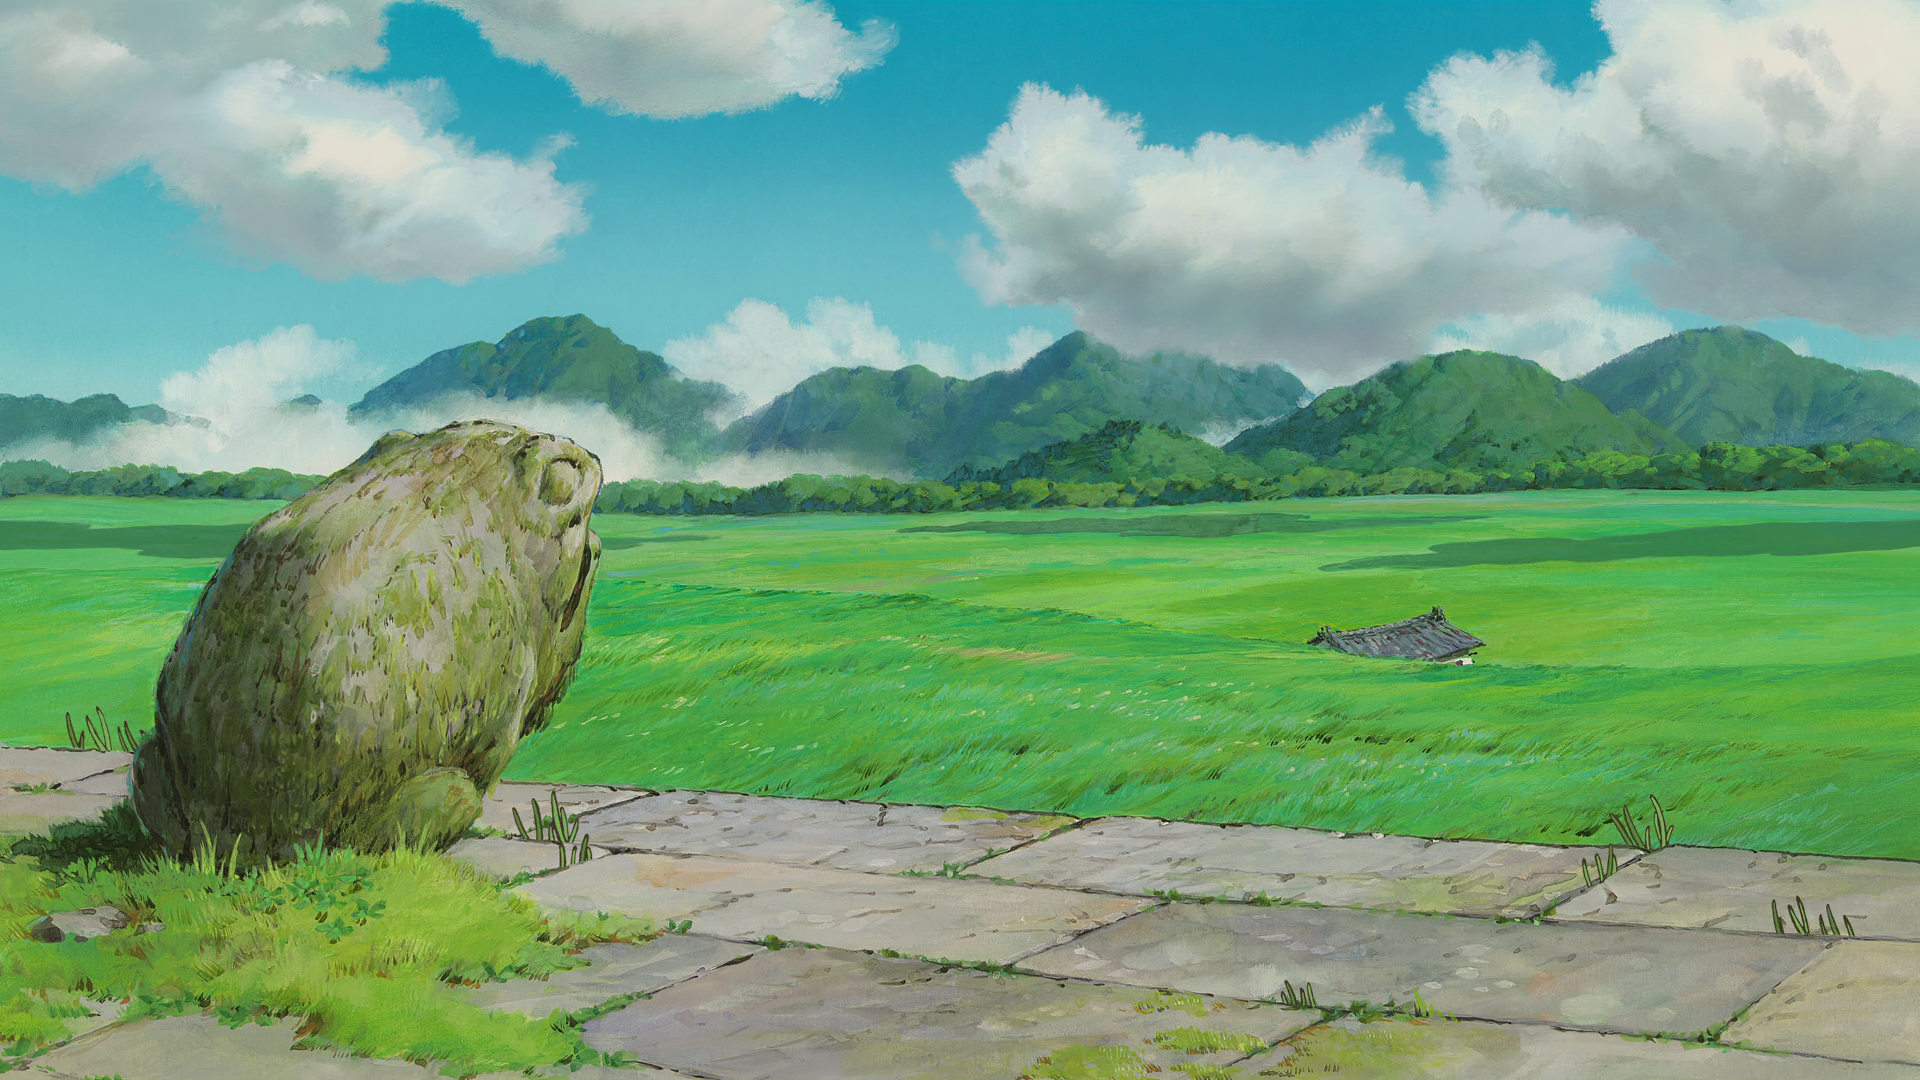 Thanks to IA, I've made a collection of flawless HQ wallpaper of Studio Ghibli Movies. [Link in comment]